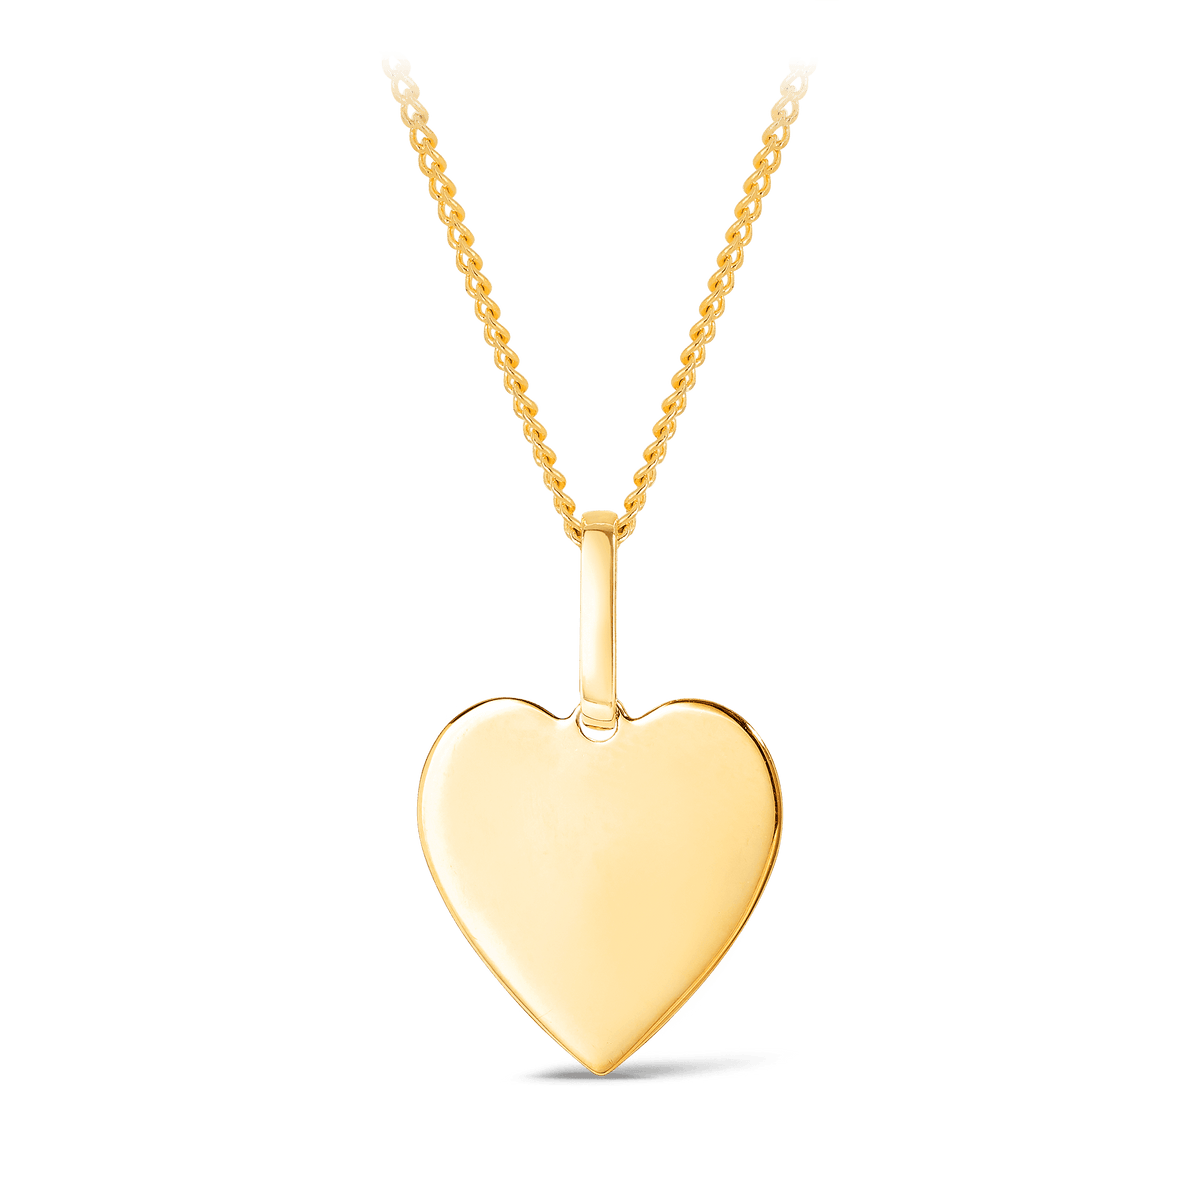 Buy Gold Heart Necklace, CZ Heart Pendant, 14kt Real Gold Love Pendant, 14K  Solid Gold Heart, Dainty CZ Heart, Open Heart, Small Heart Necklace Online  in India - Etsy